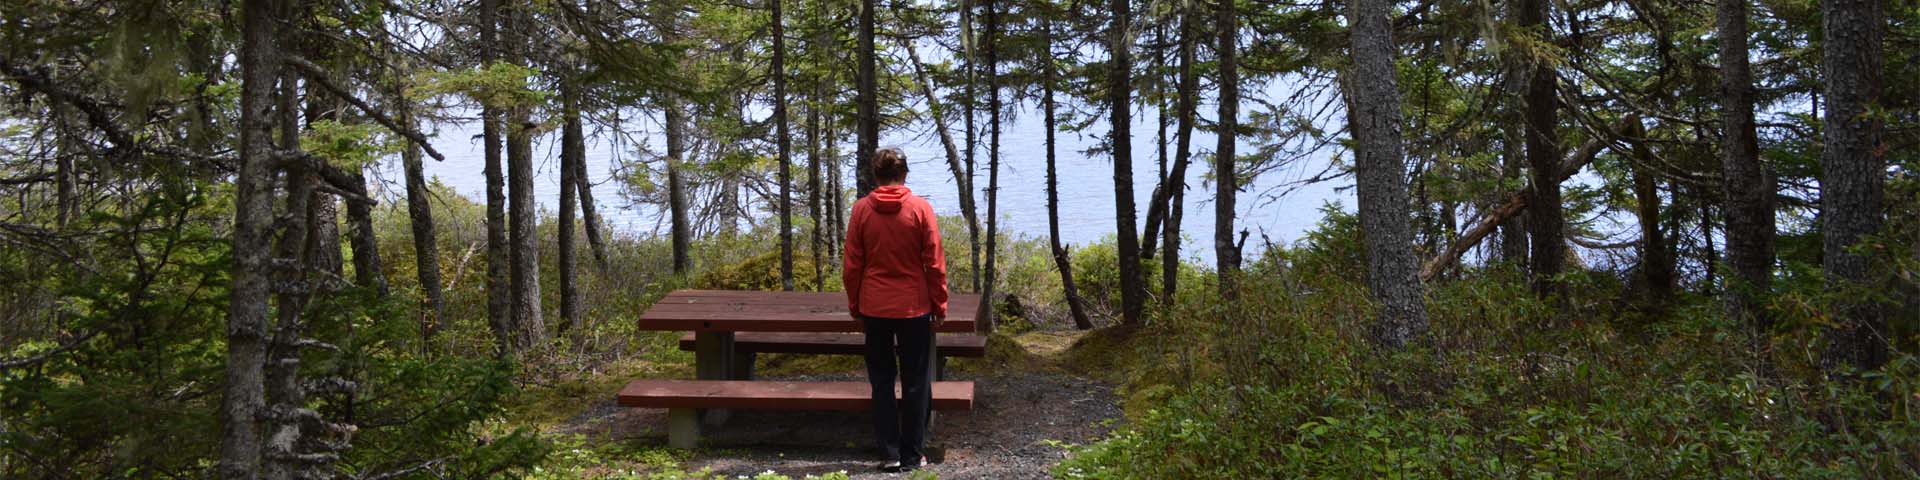 an individual in a red jacket stands next to a picnic table in a pond-side forest